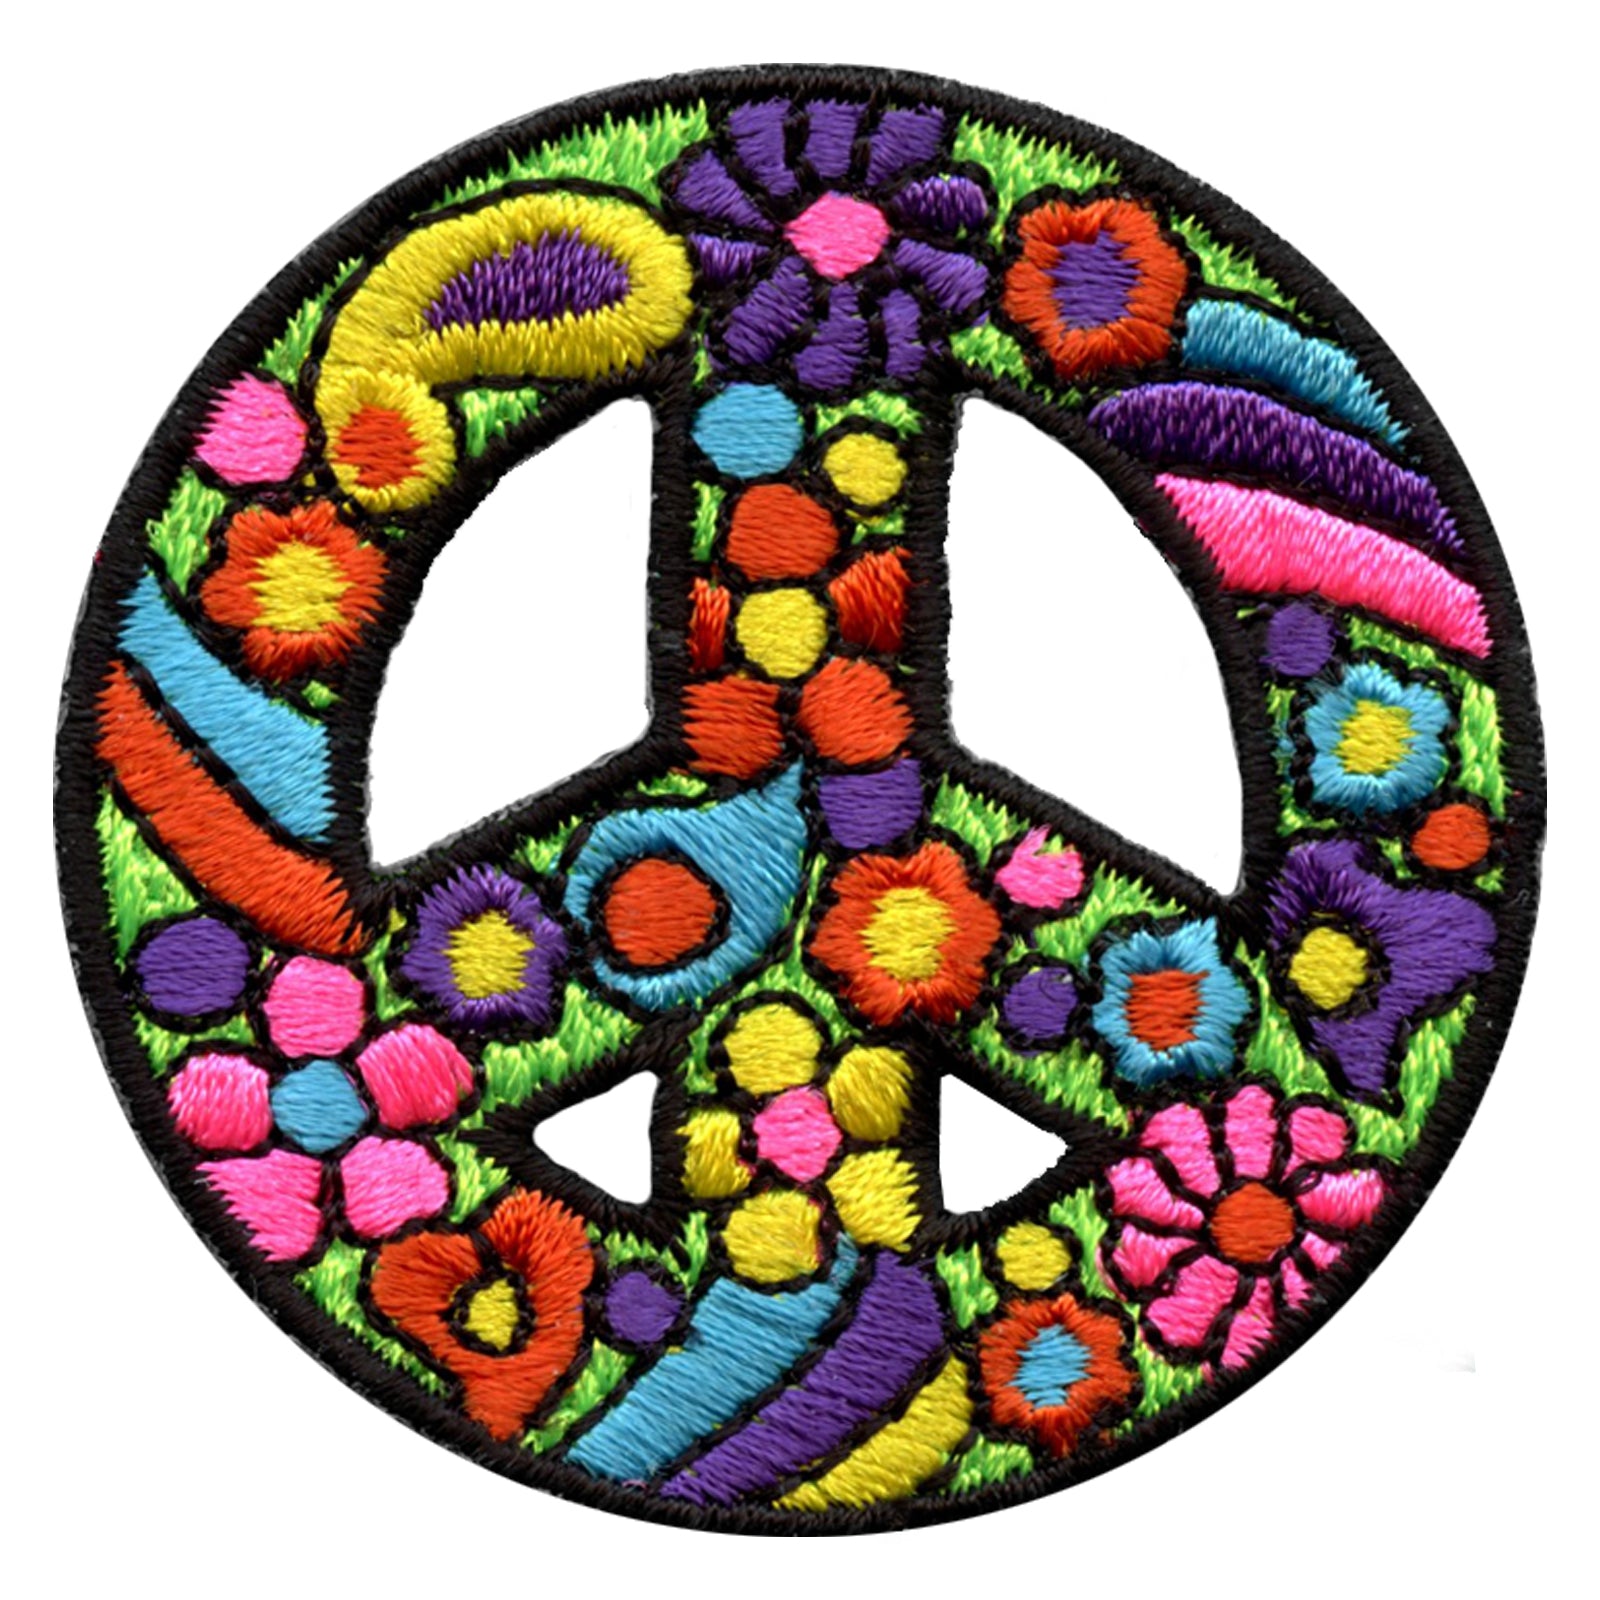 Retro Psychedelic Peace Symbol Embroidered Iron On Patch 